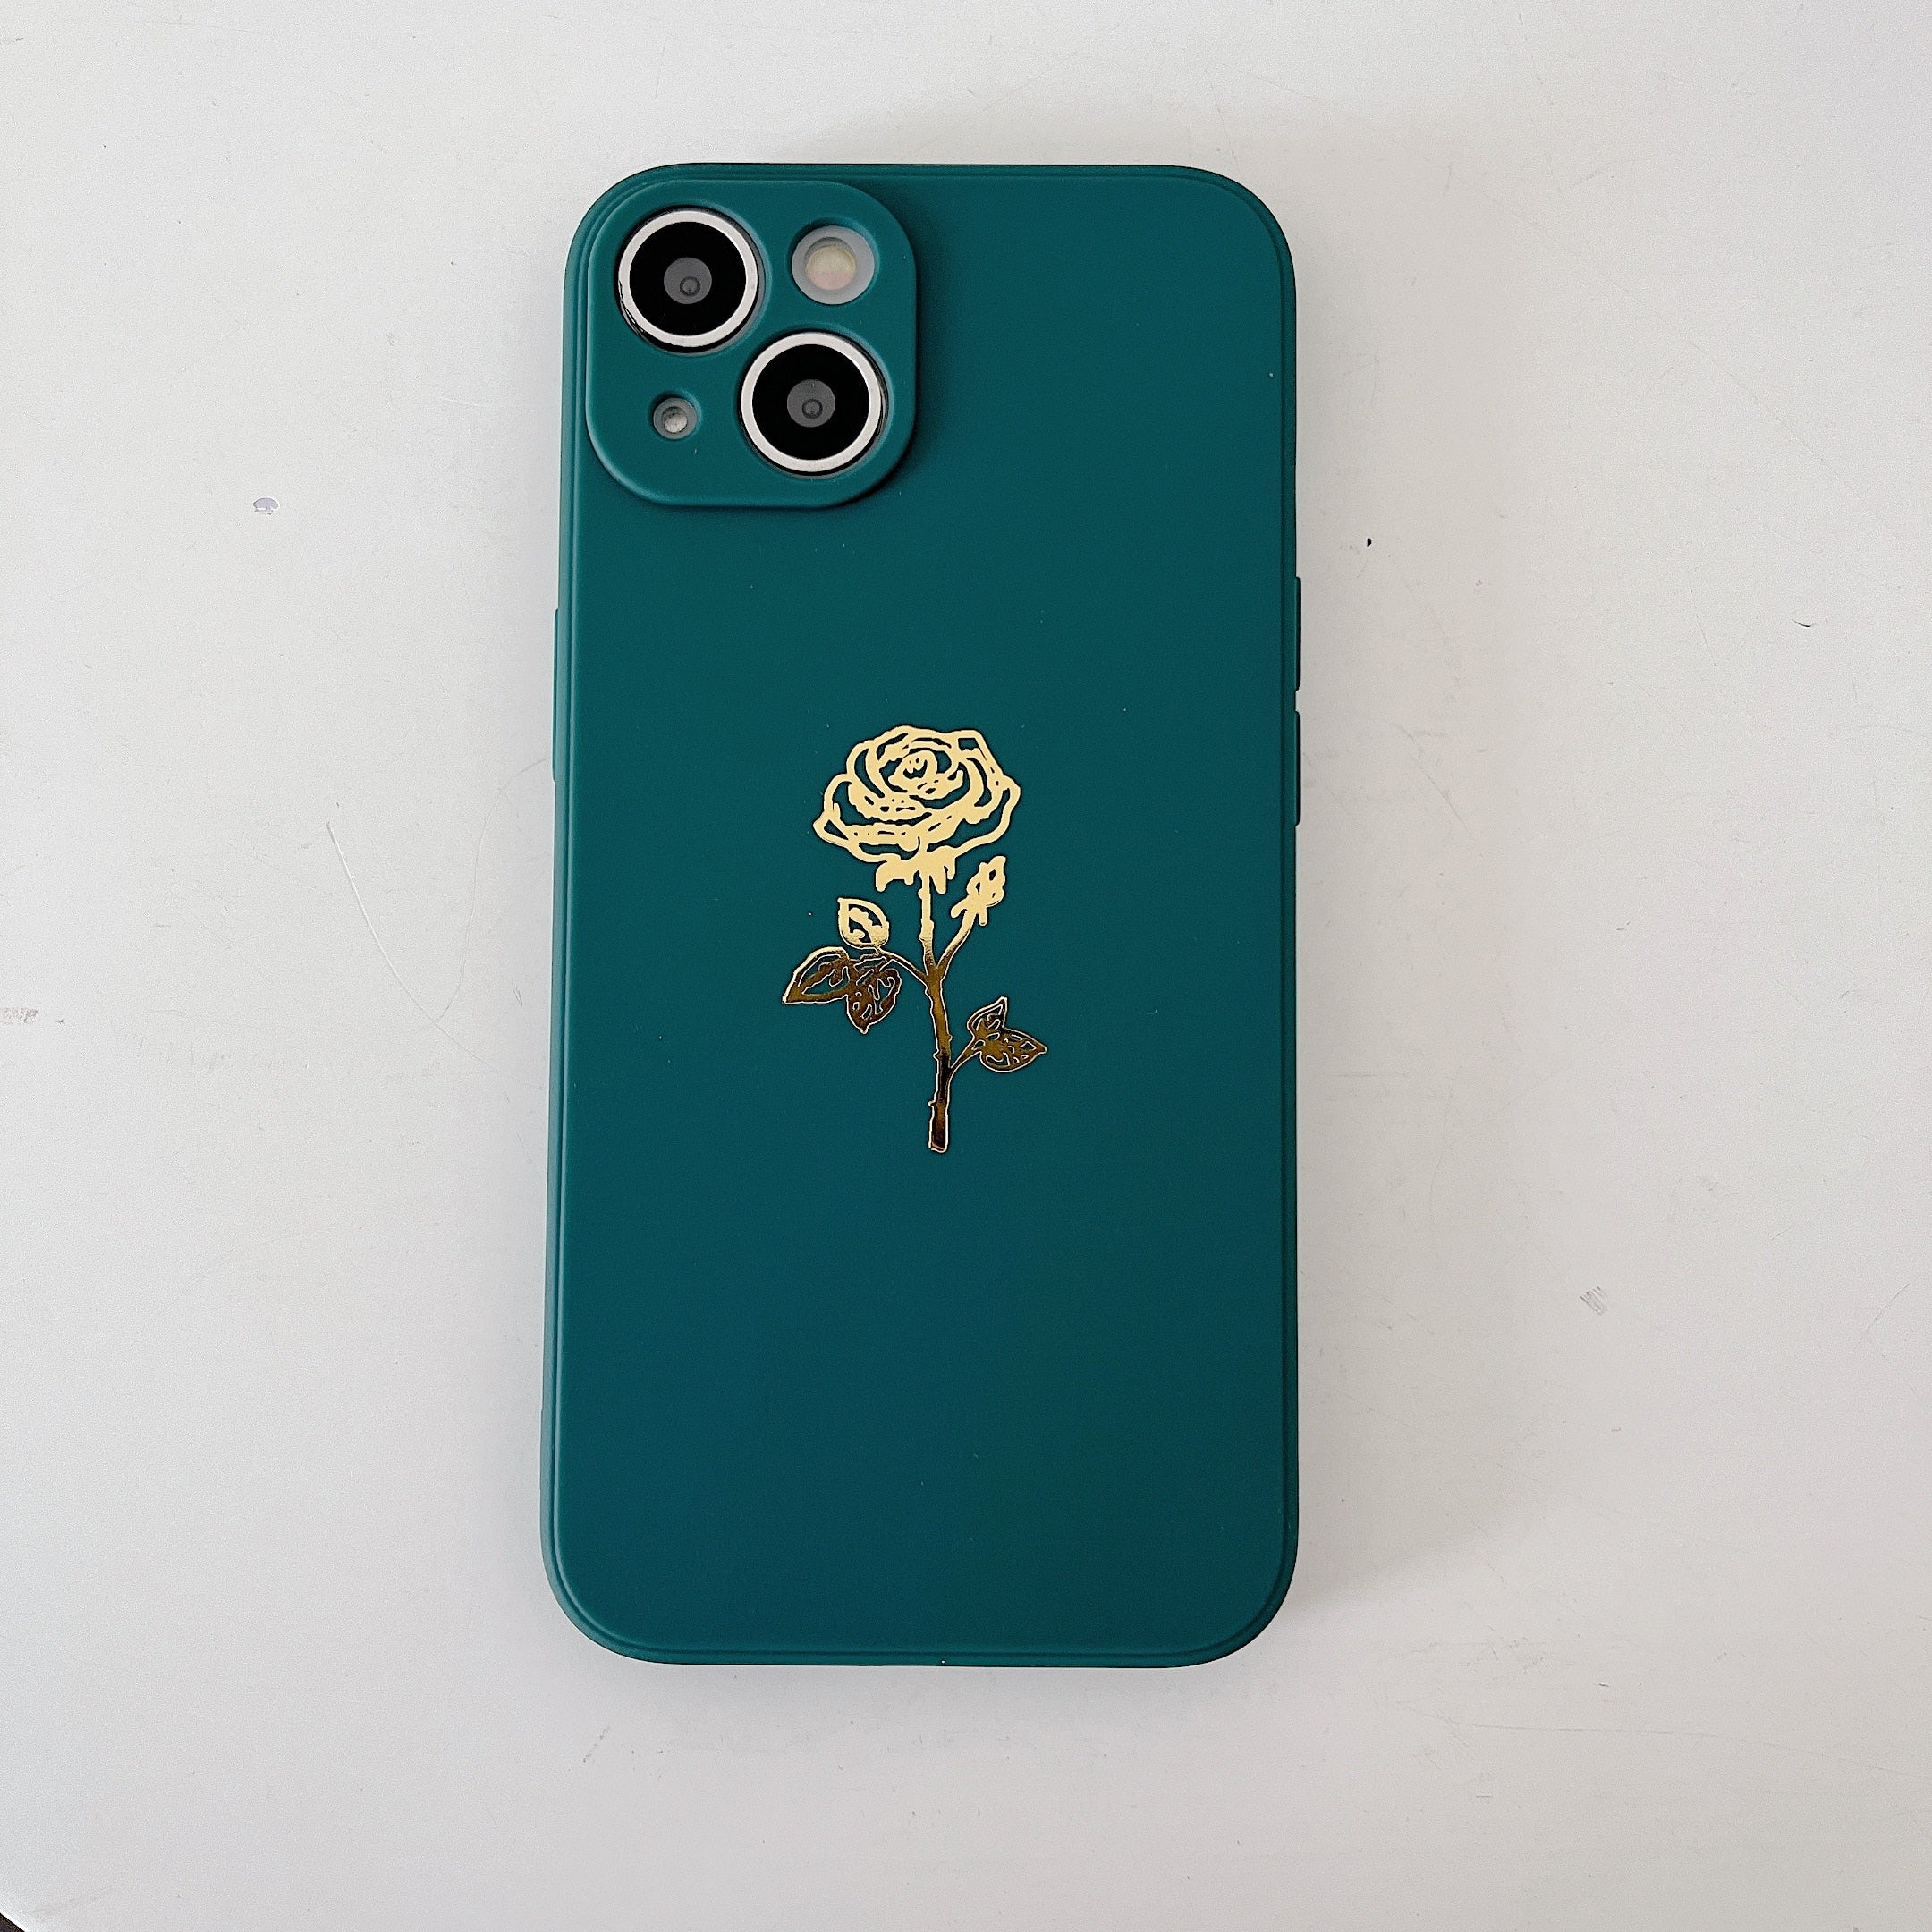 Silicone iPhone Case with Plated Rose Flower-Fonally-For iPhone 7 or 8-Green-